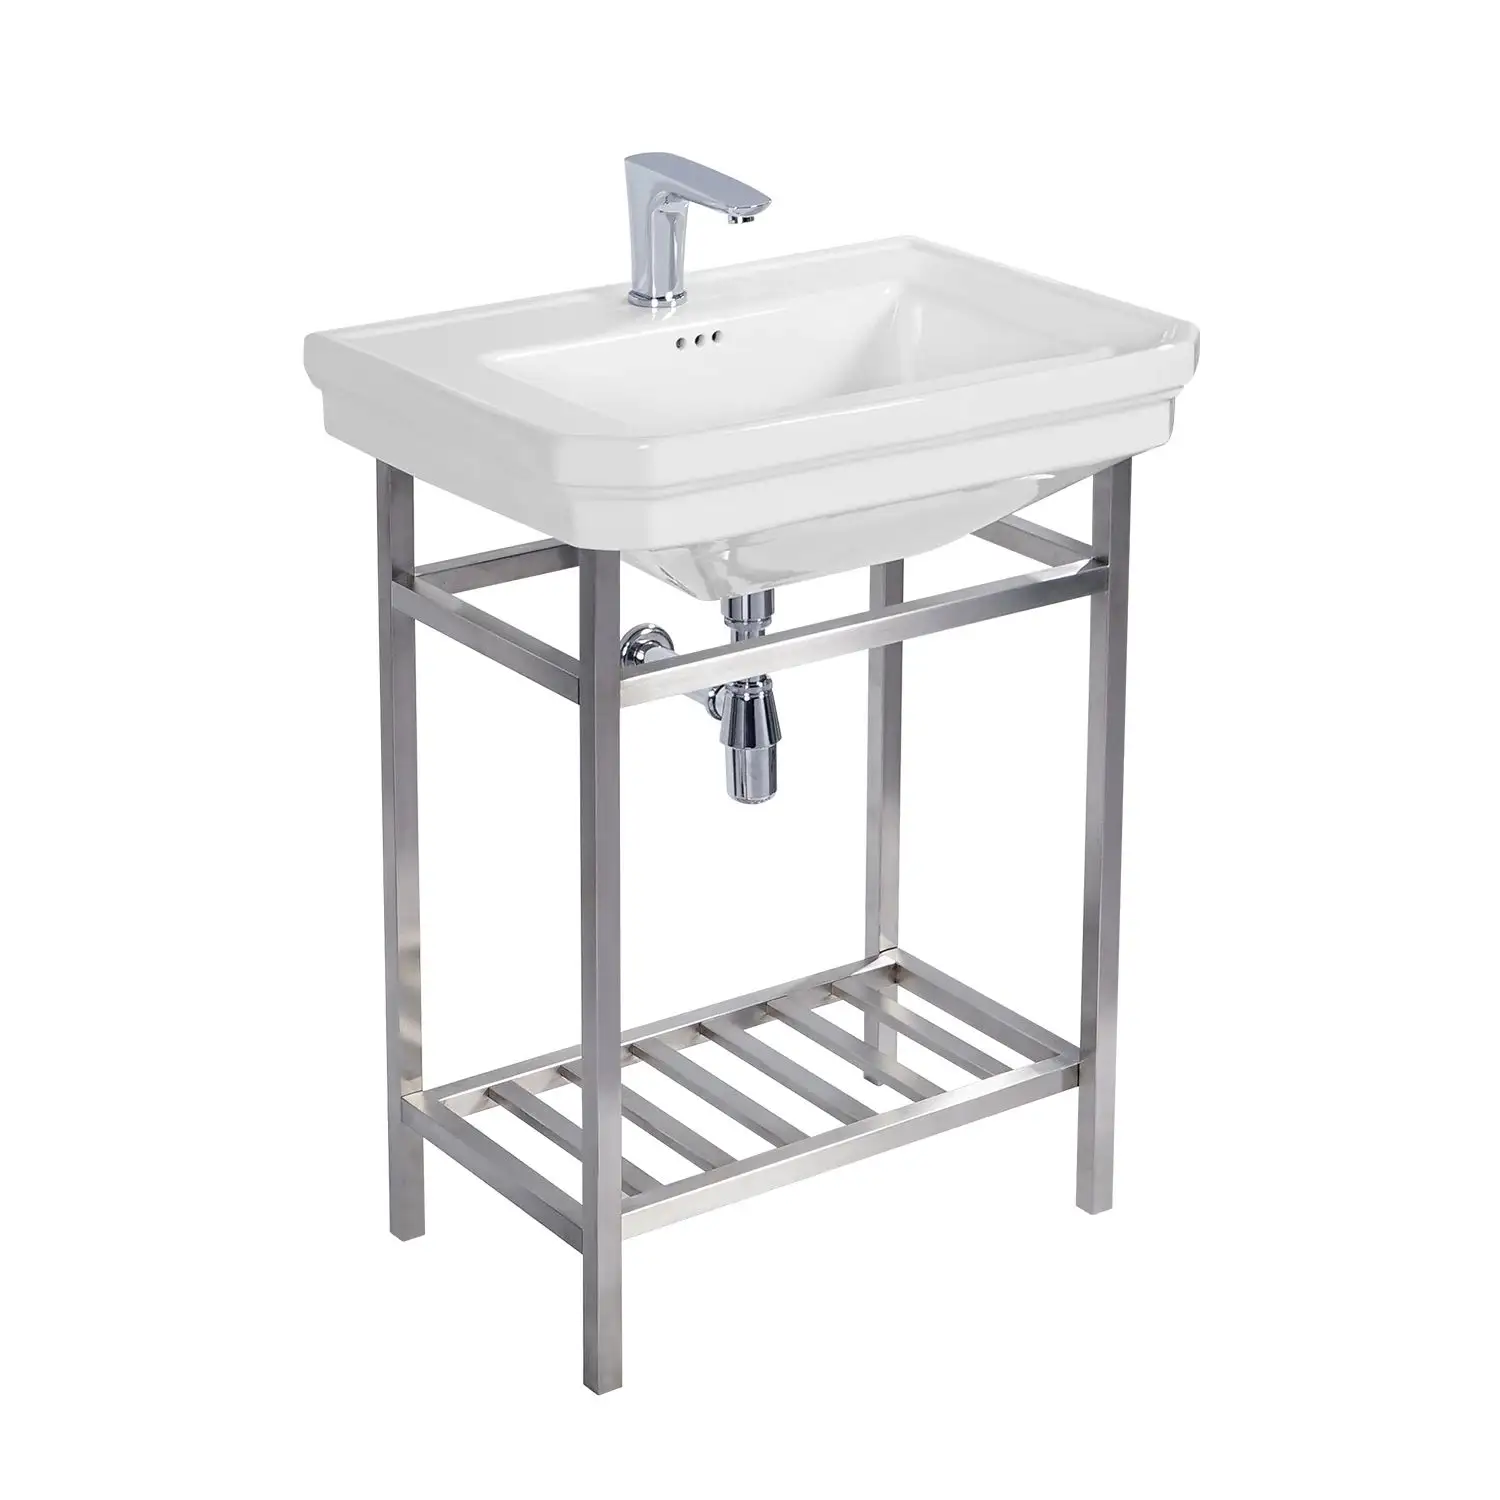 MEILONG MB-2060SC4 cUPC Console Sink Rectangle Modern Design 26 inches / 67 cm Lavatory Freestanding Metal Console Sink